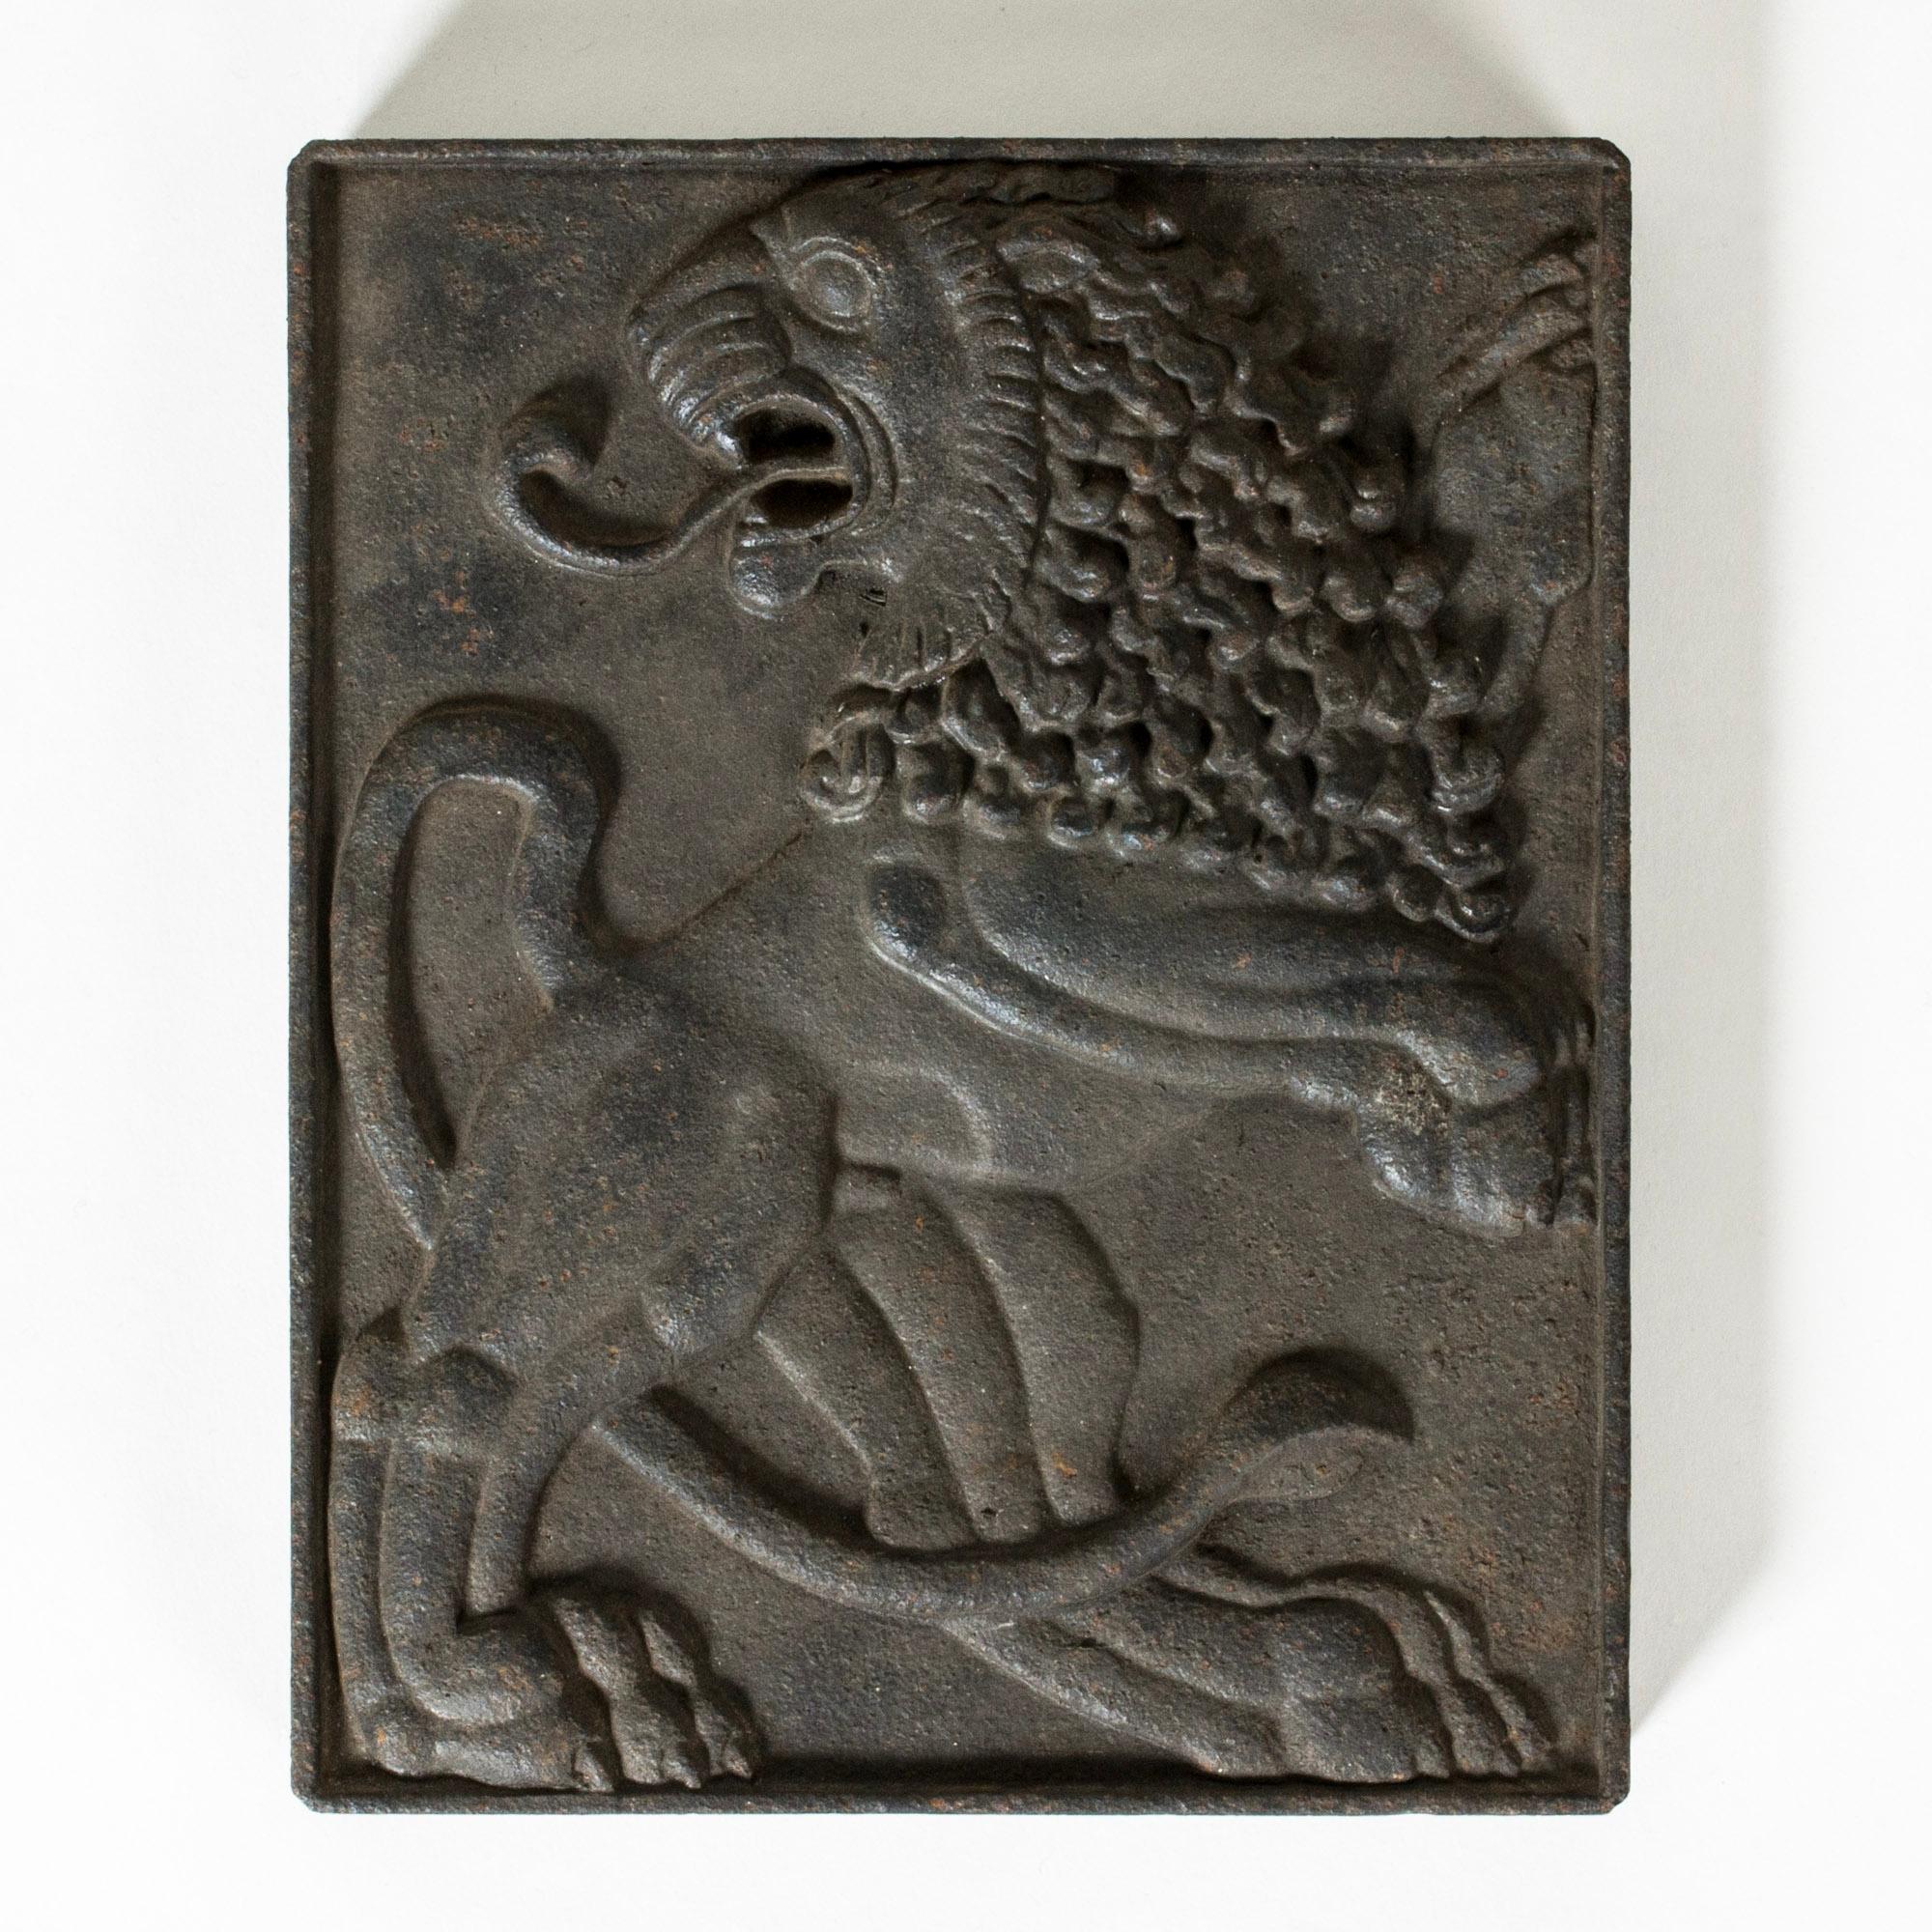 Striking relief by Anna Petrus, made from cast iron. Beautiful, energetic motif of a lion with a flowing mane on its back paws, great attention to detail.

Anna Petrus was a Swedish sculptor, industrial designer and dancer with a unique, powerful